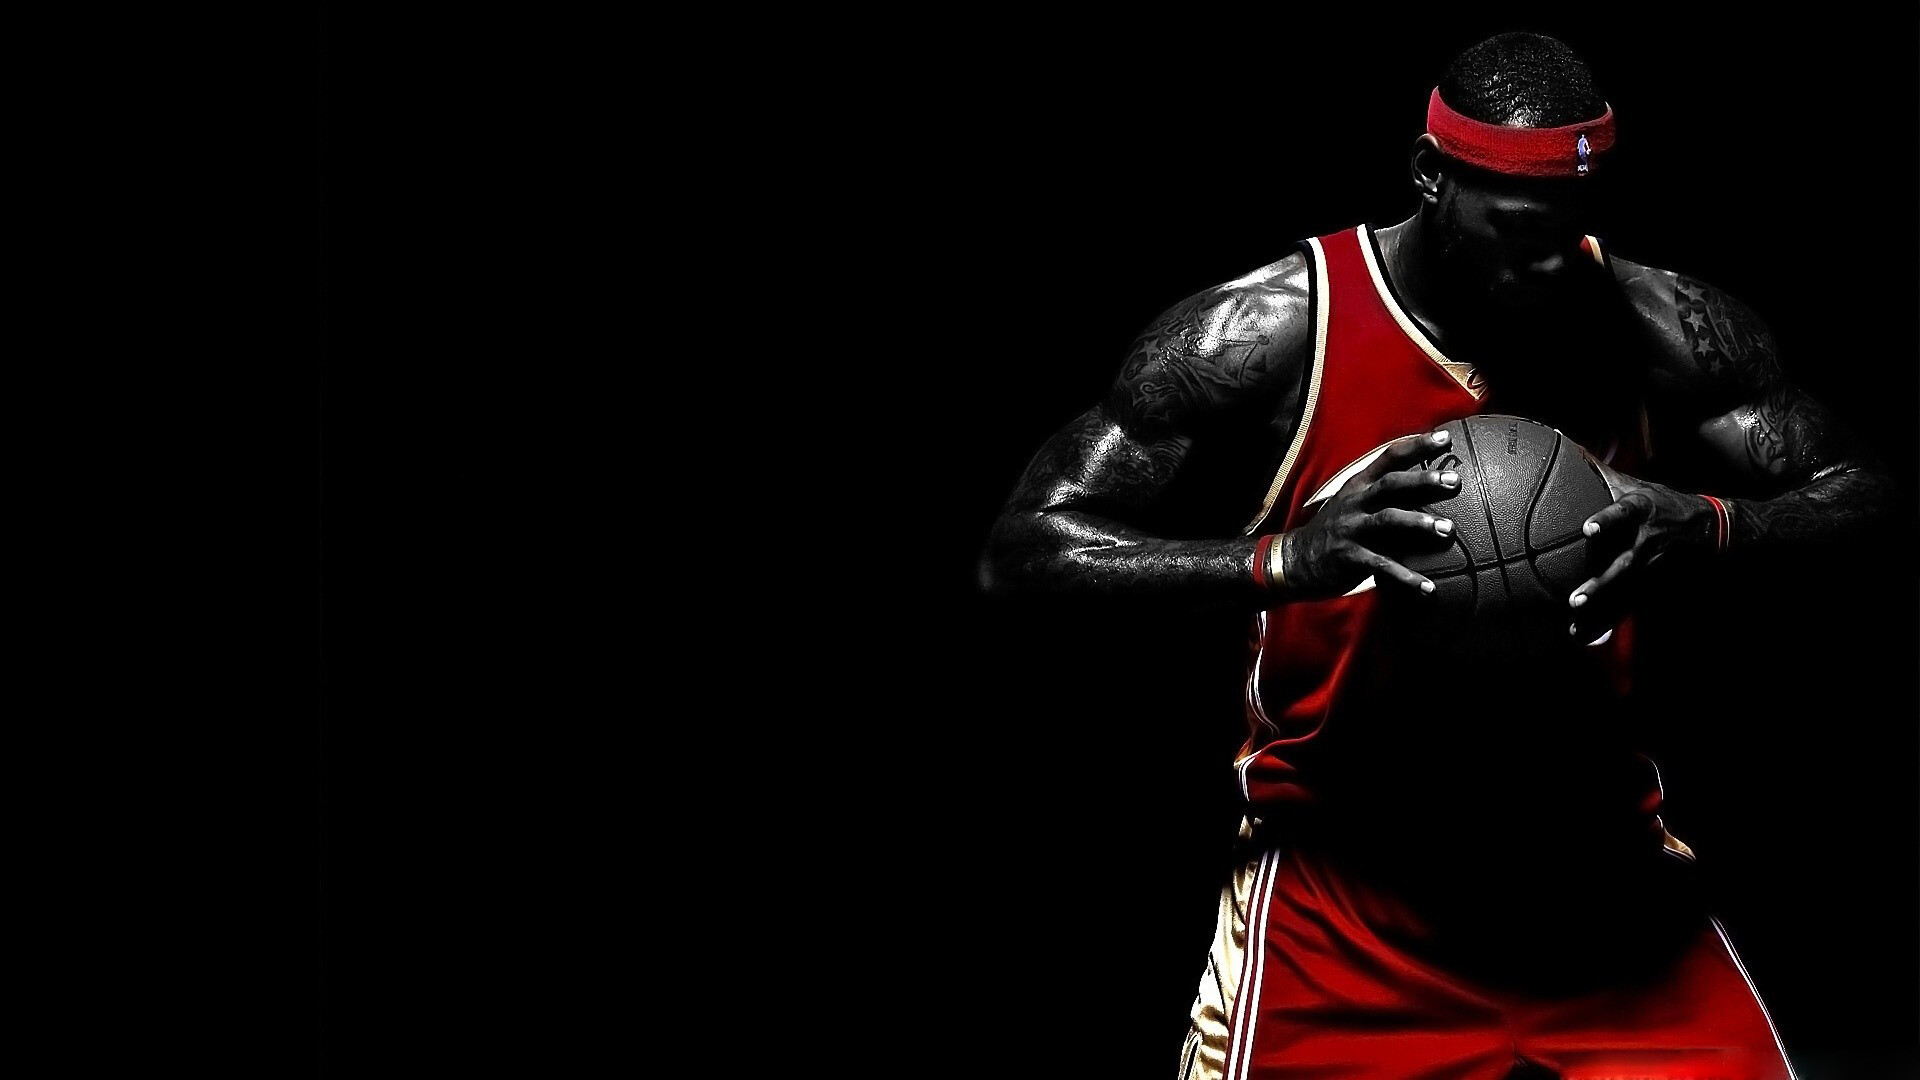 Basketball wallpapers, Sports backgrounds, HD collection, Ball is life, 1920x1080 Full HD Desktop